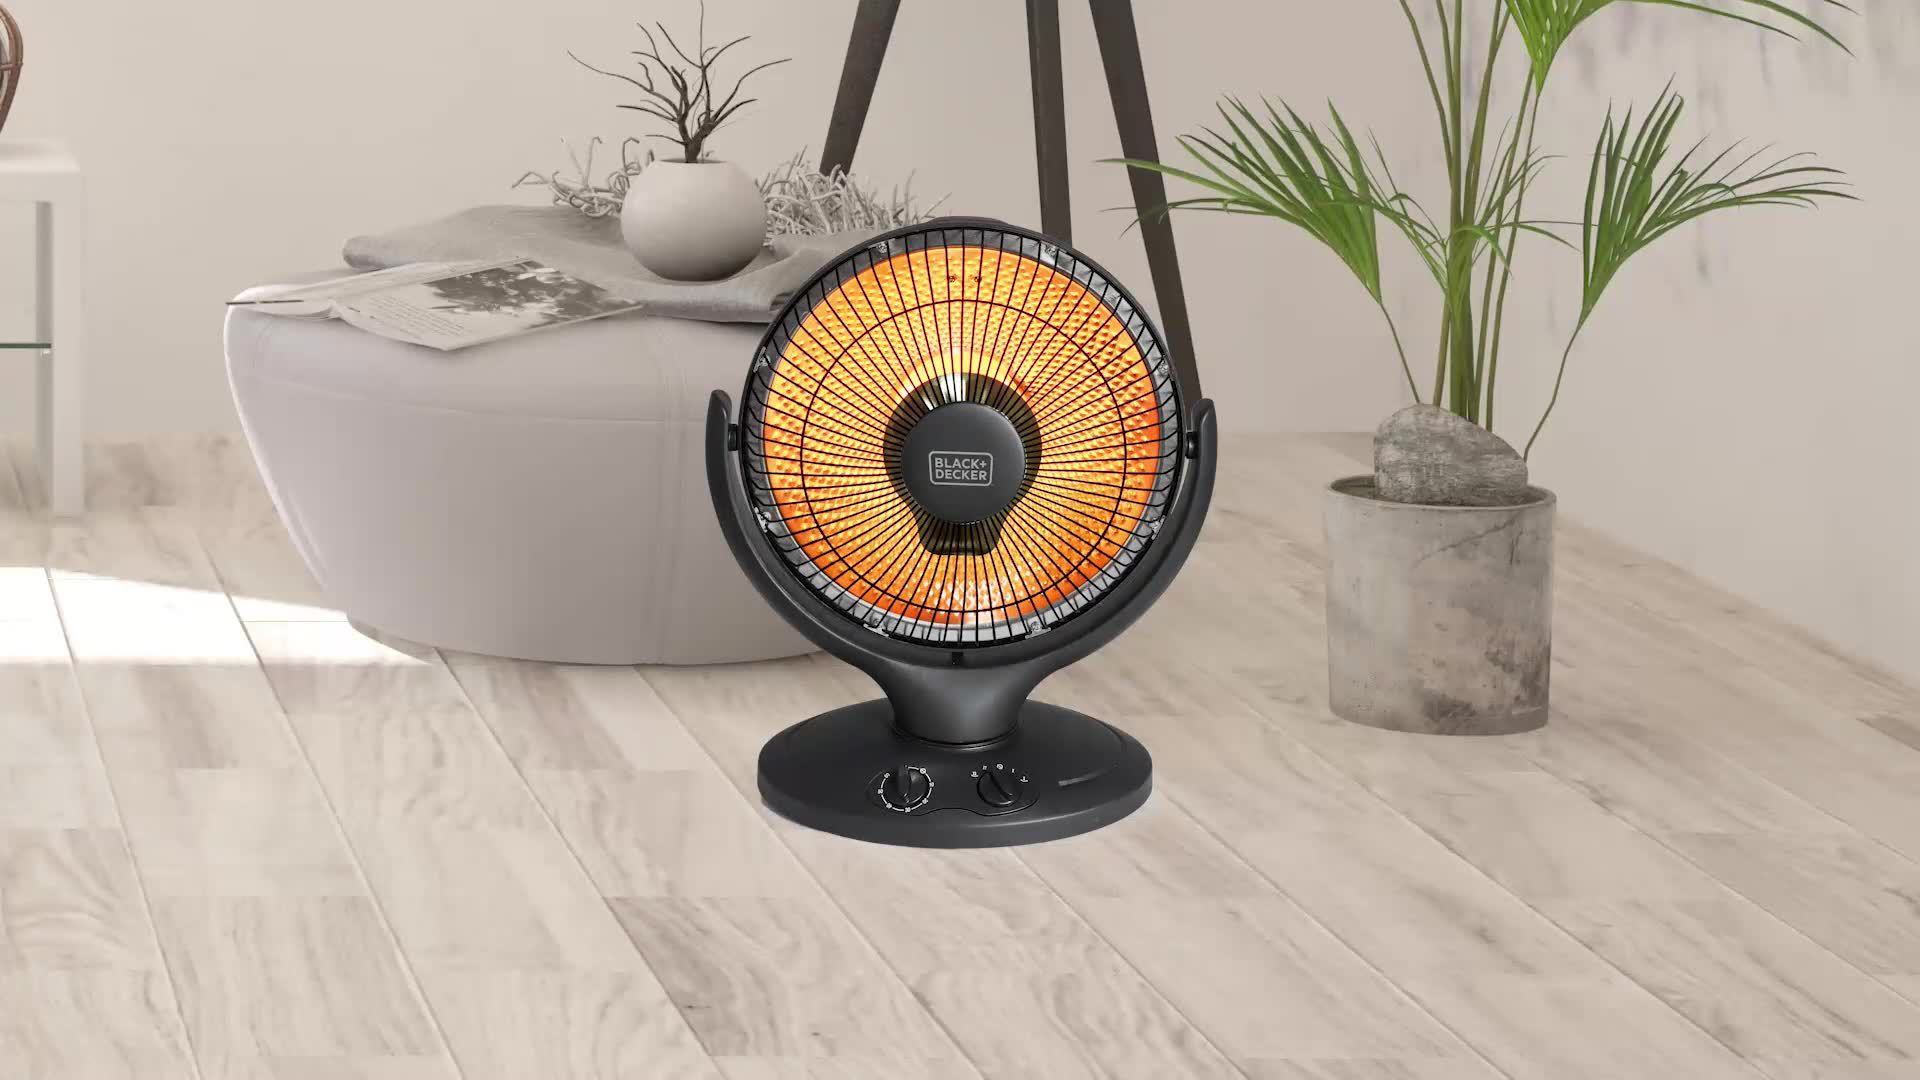 BLACK+DECKER Indoor Space Heater, Infrared Heater with E-Save Function,  1500W 